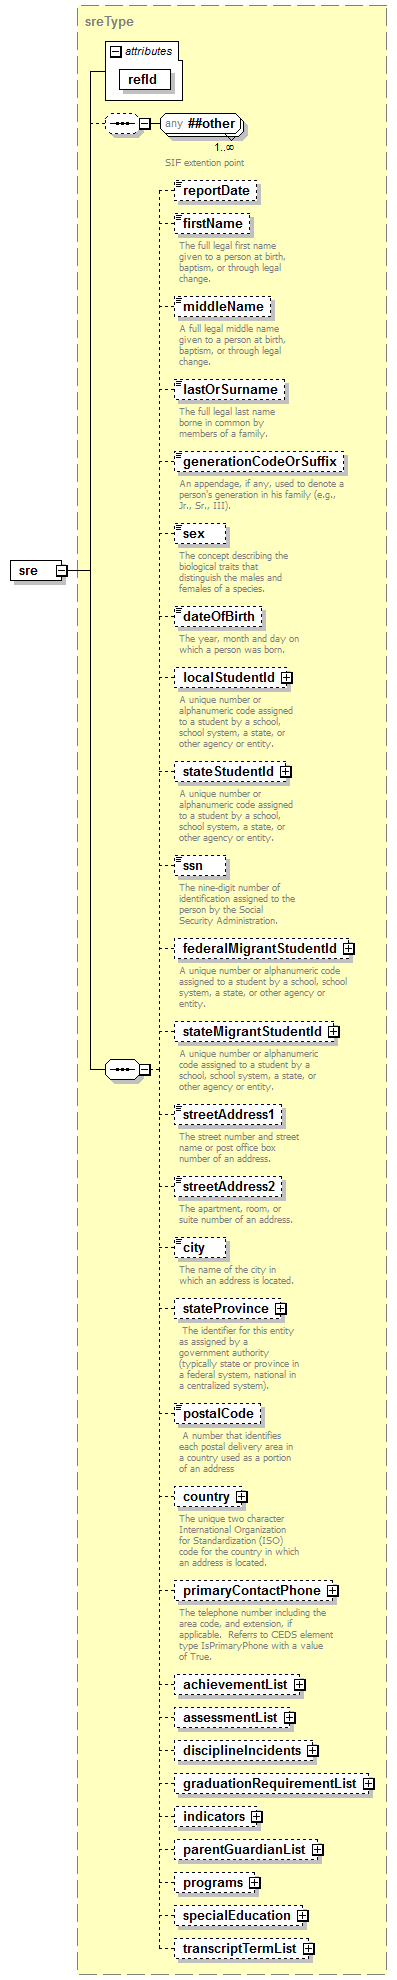 ReportObjects_diagrams/ReportObjects_p1.png